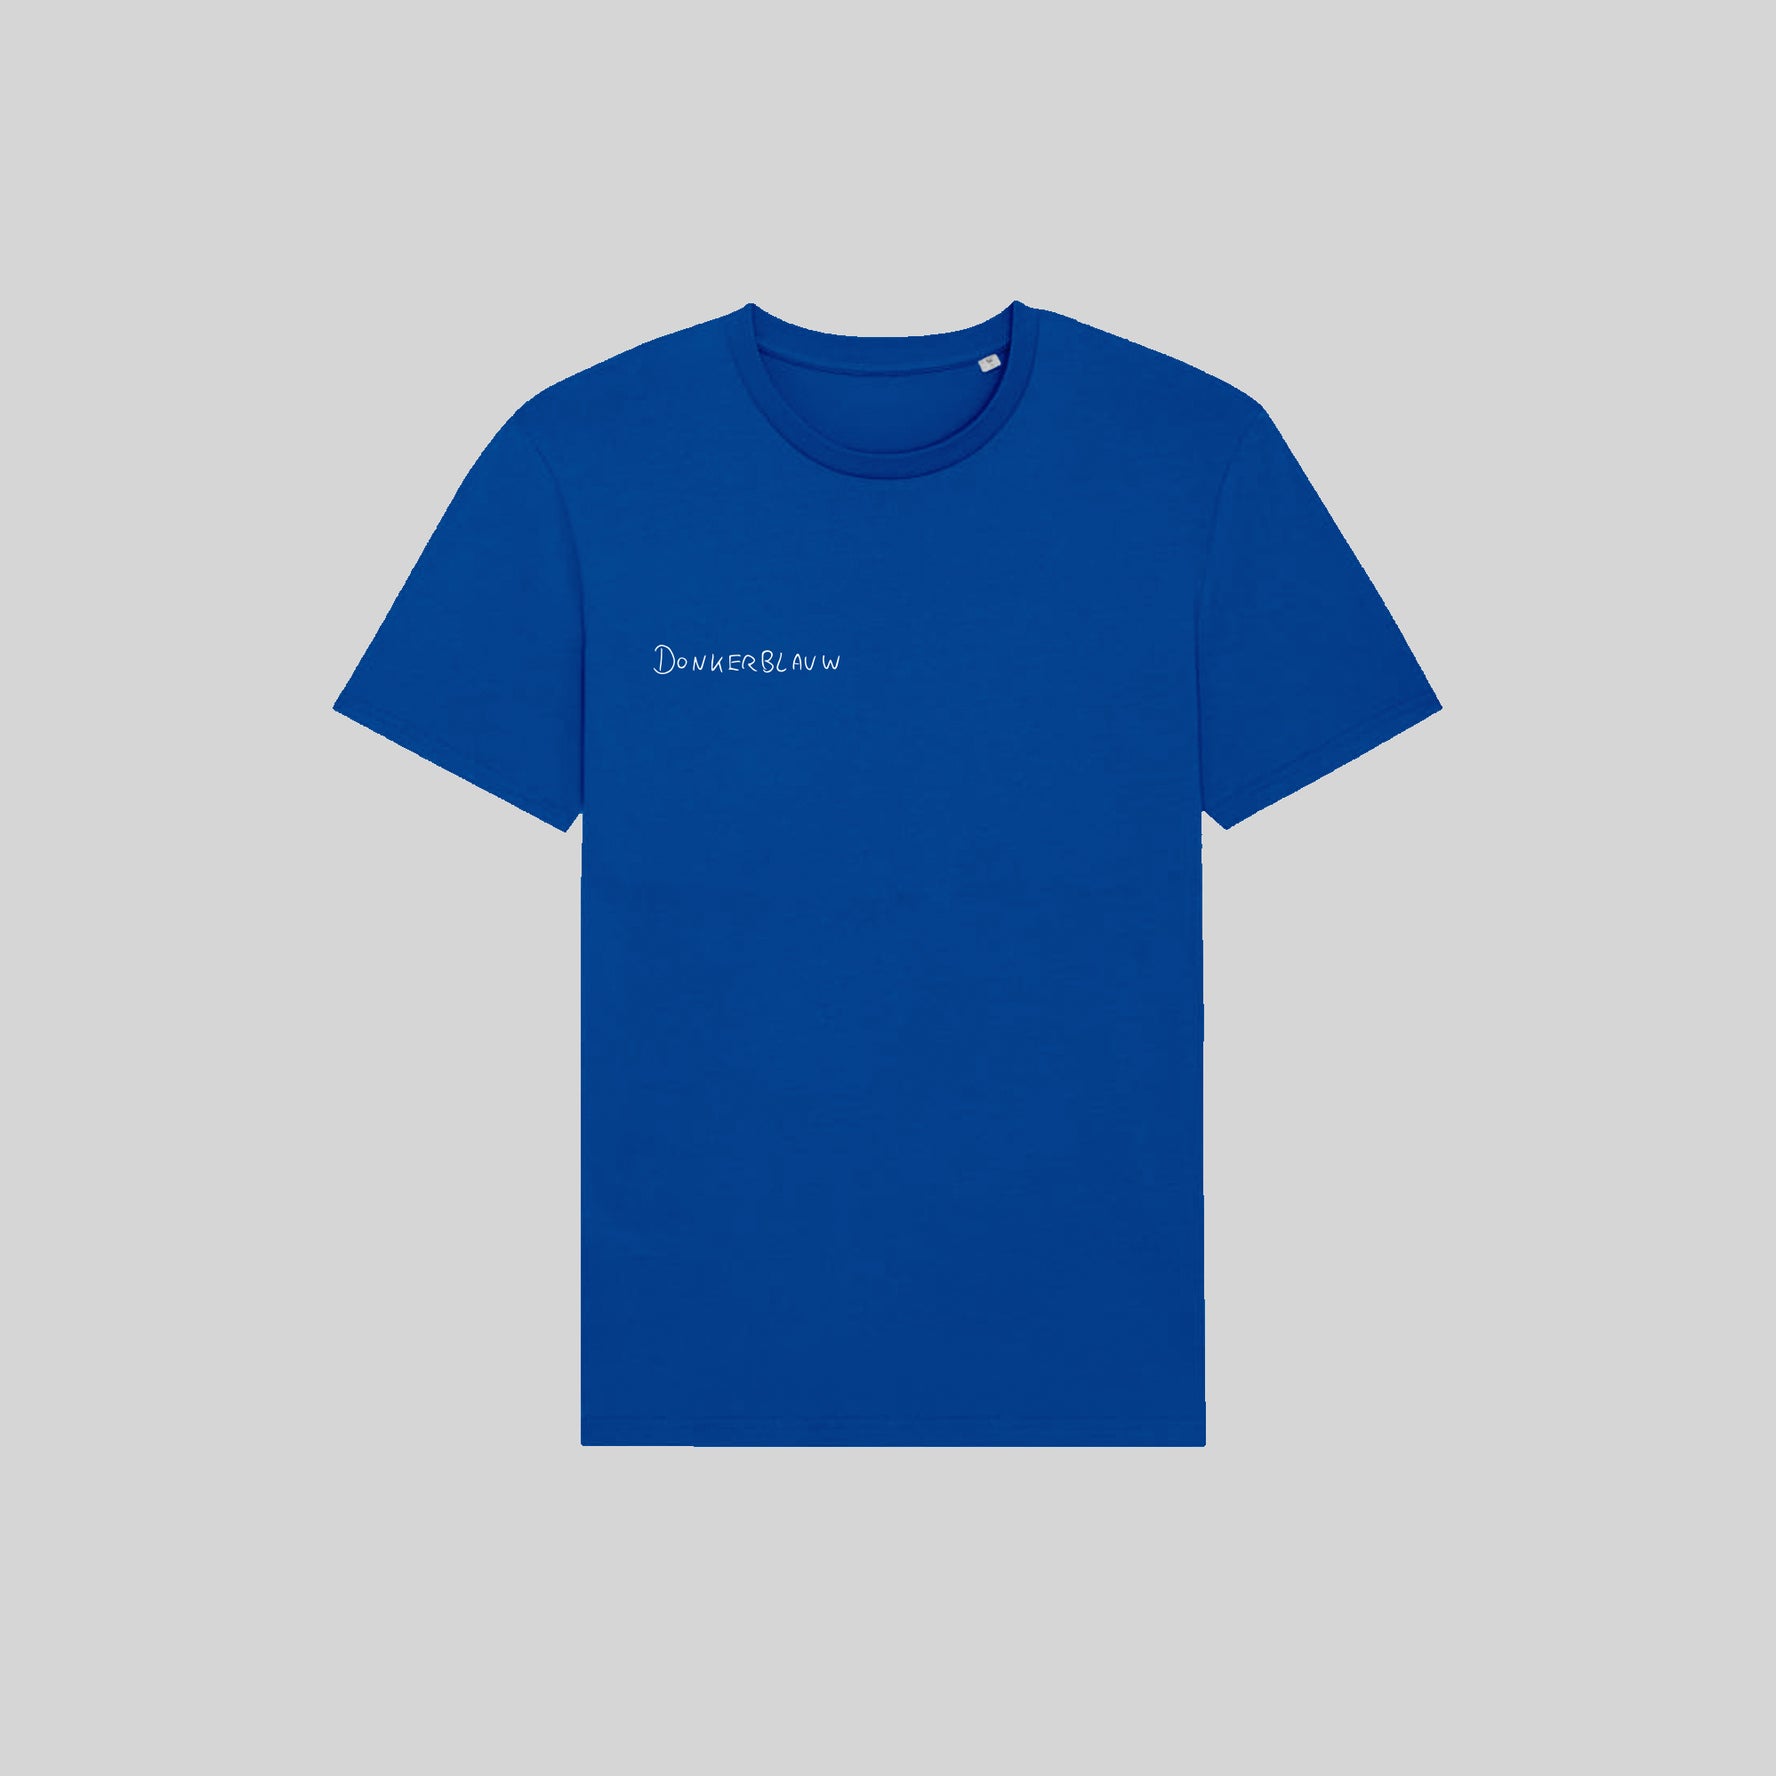 Donkerblauw (Store Exclusive Blue T-shirt)